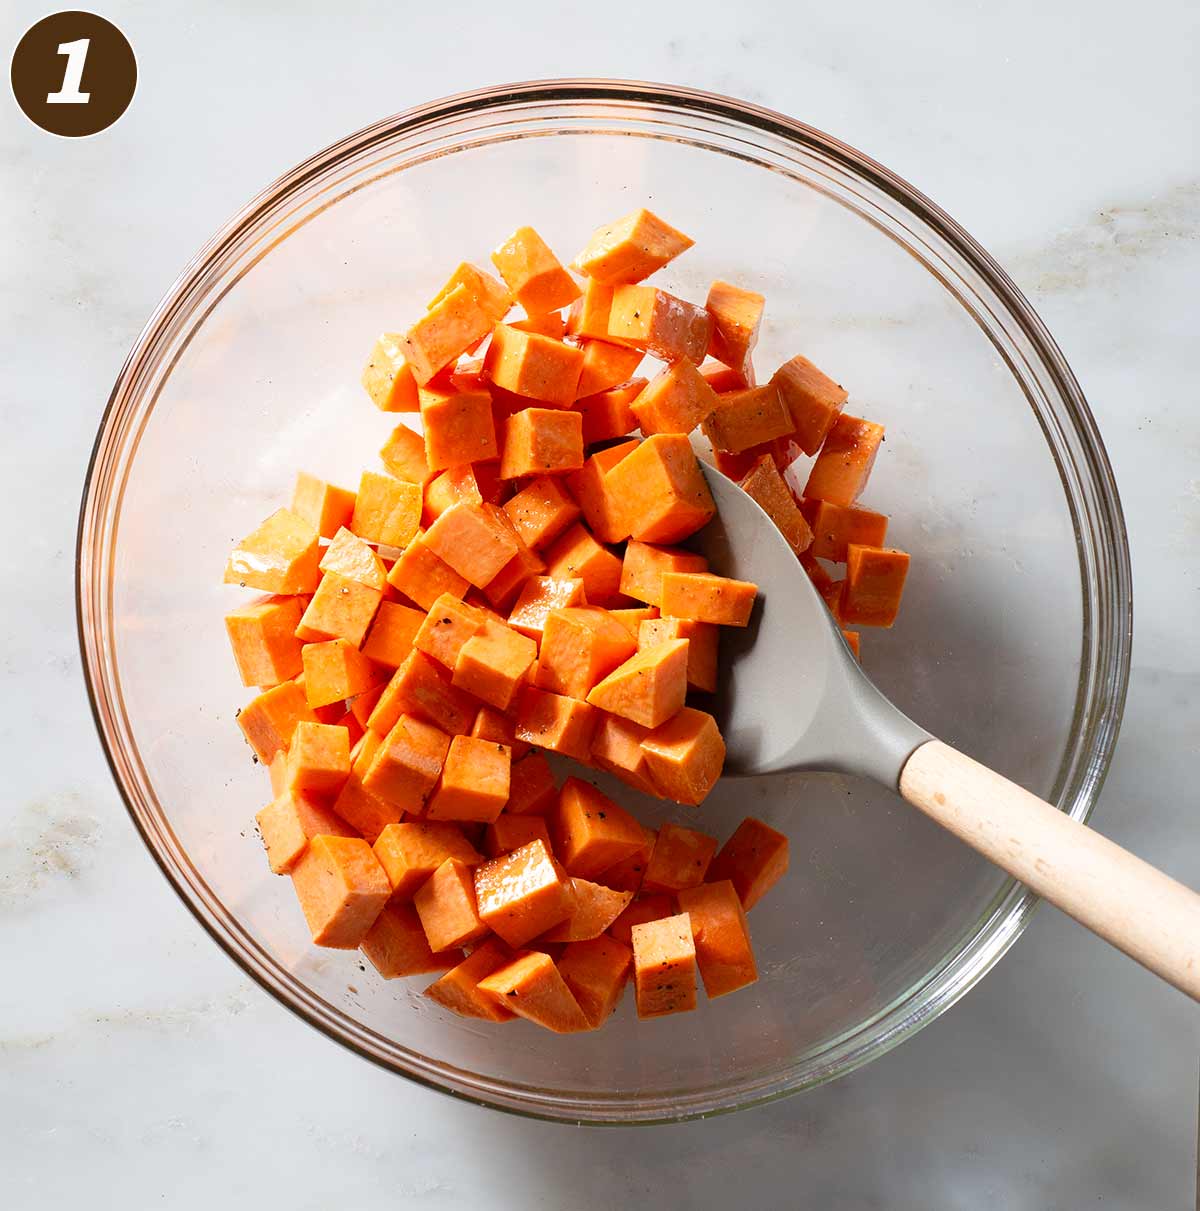 Raw sweet potato cubes being stirred in a bowl.